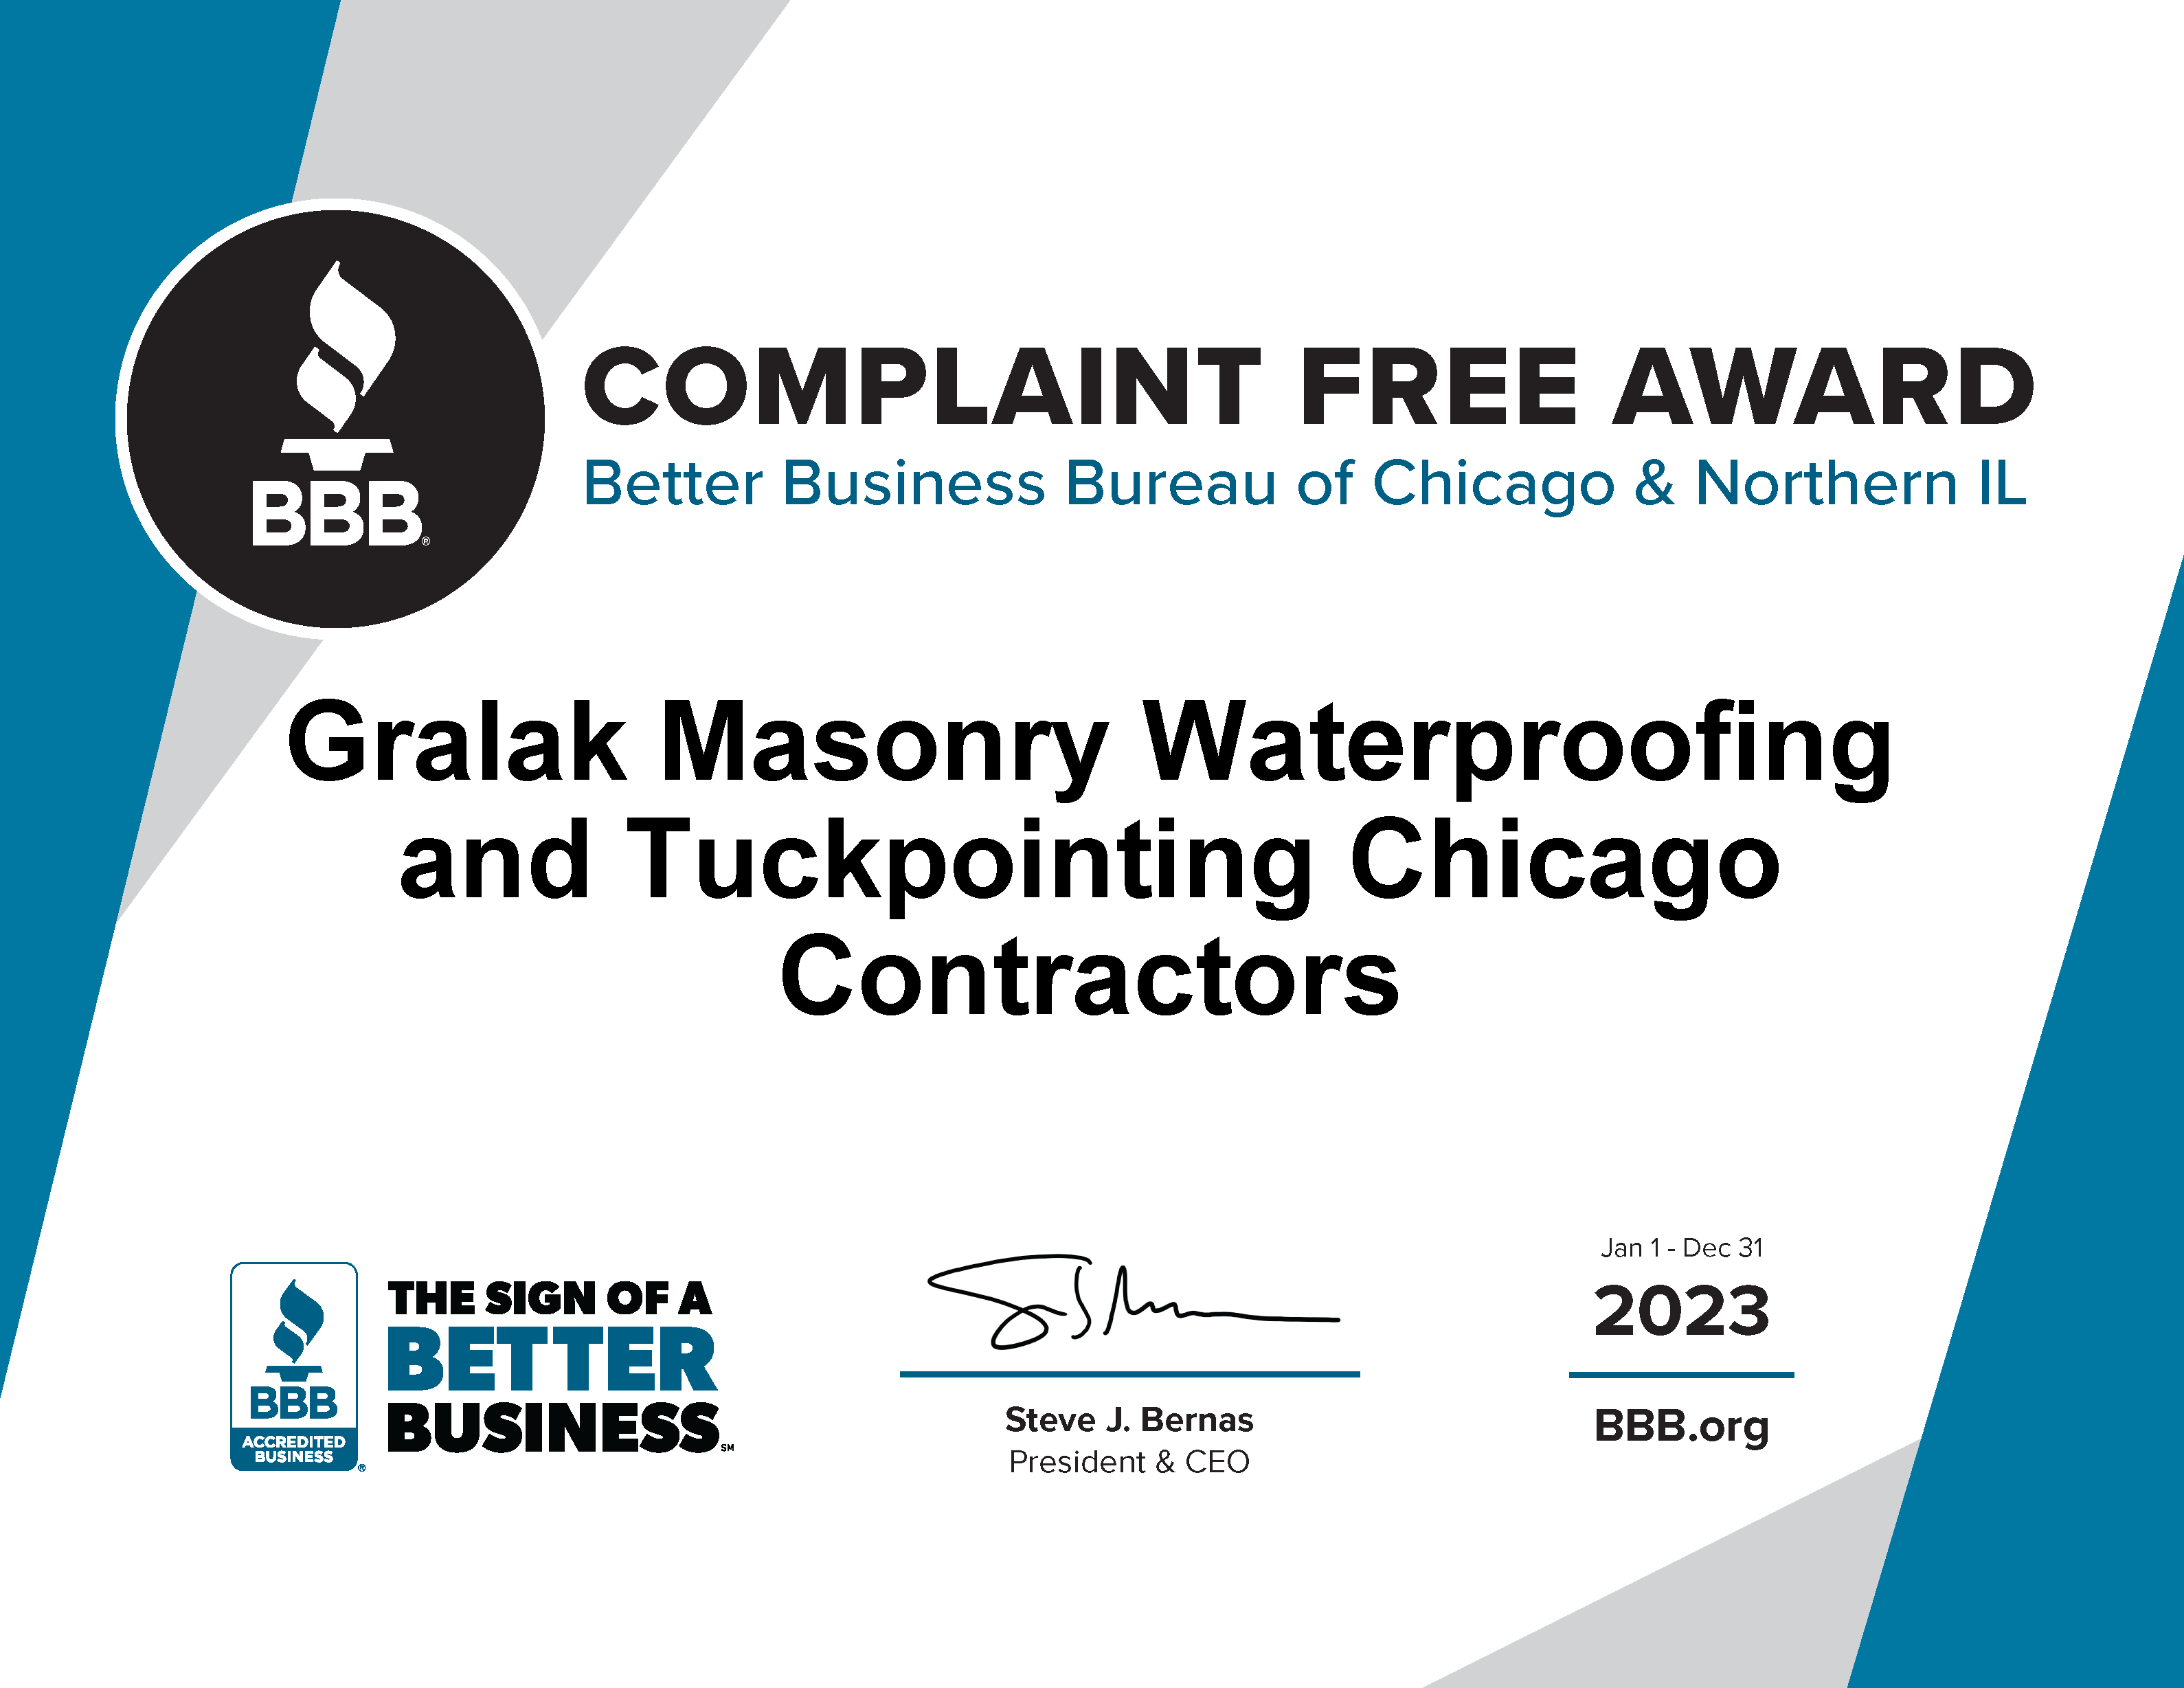 Certificate from the Better Business Bureau Complaint Free Award for 2023 recognizing Gralak Tuckpointing